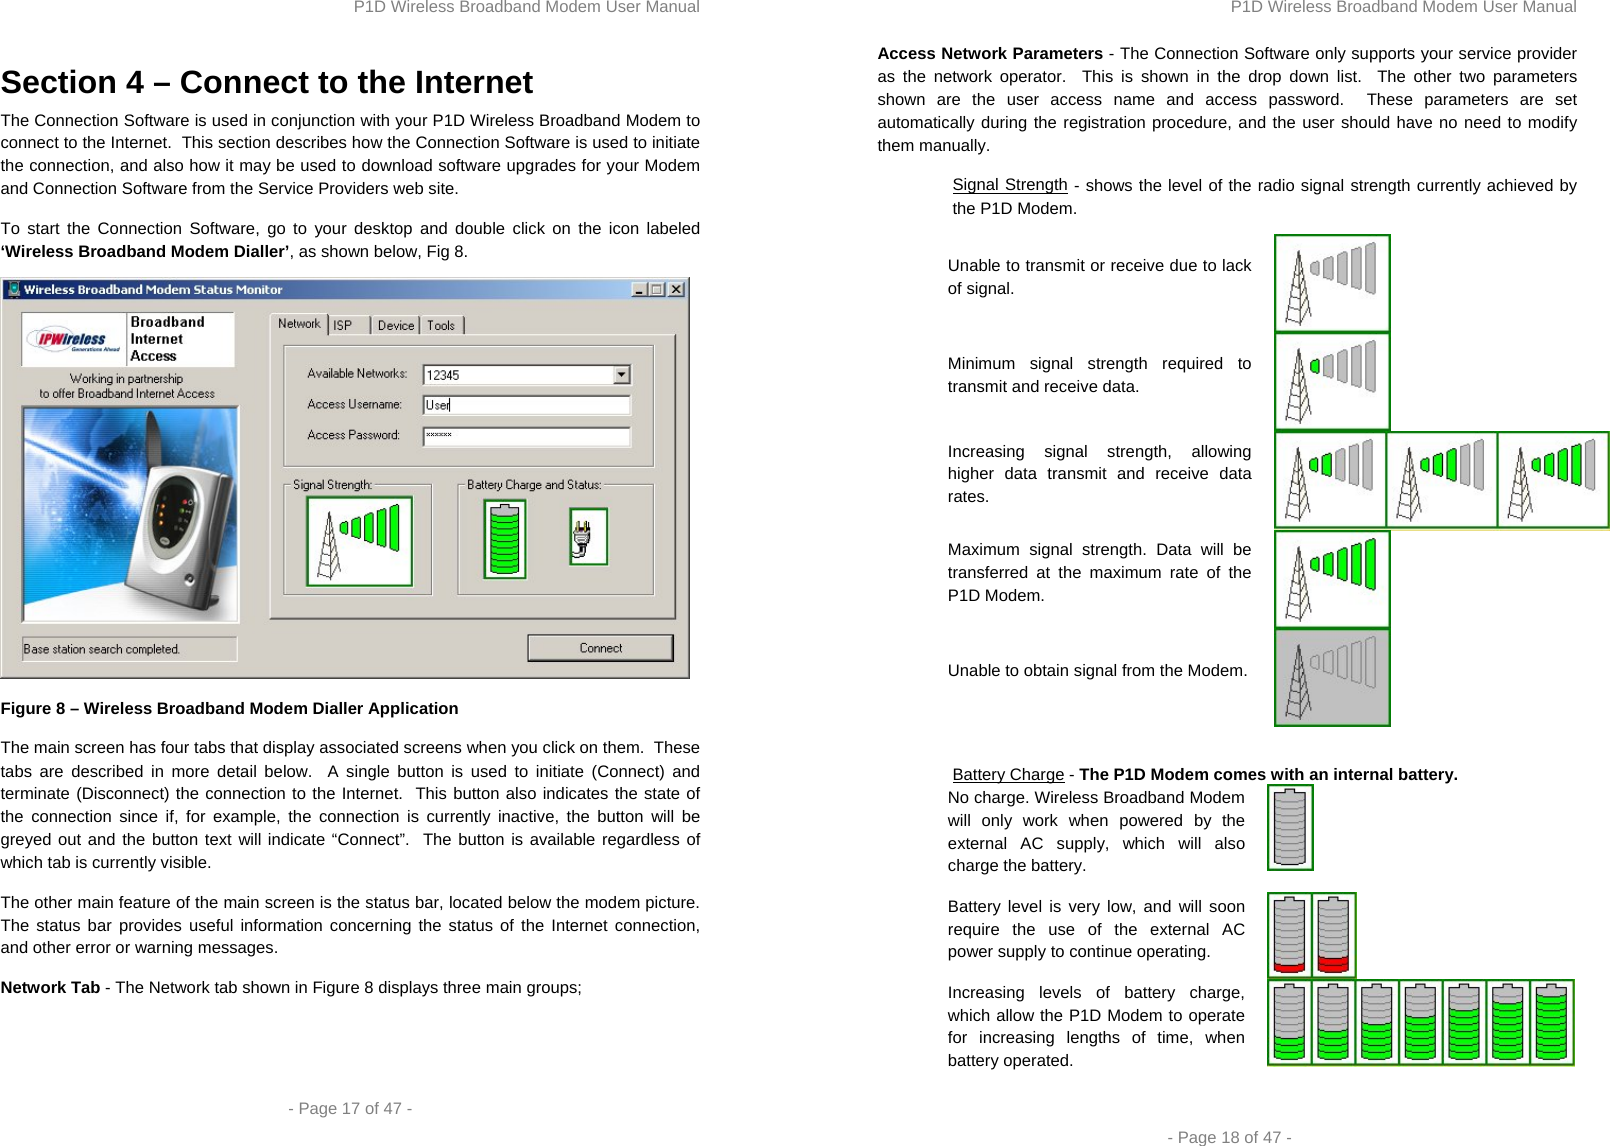 P1D Wireless Broadband Modem User Manual  - Page 17 of 47 -  Section 4 – Connect to the Internet The Connection Software is used in conjunction with your P1D Wireless Broadband Modem to connect to the Internet.  This section describes how the Connection Software is used to initiate the connection, and also how it may be used to download software upgrades for your Modem and Connection Software from the Service Providers web site. To start the Connection Software, go to your desktop and double click on the icon labeled ‘Wireless Broadband Modem Dialler’, as shown below, Fig 8.  Figure 8 – Wireless Broadband Modem Dialler Application The main screen has four tabs that display associated screens when you click on them.  These tabs are described in more detail below.  A single button is used to initiate (Connect) and terminate (Disconnect) the connection to the Internet.  This button also indicates the state of the connection since if, for example, the connection is currently inactive, the button will be greyed out and the button text will indicate “Connect”.  The button is available regardless of which tab is currently visible.  The other main feature of the main screen is the status bar, located below the modem picture.  The status bar provides useful information concerning the status of the Internet connection, and other error or warning messages. Network Tab - The Network tab shown in Figure 8 displays three main groups;  P1D Wireless Broadband Modem User Manual  - Page 18 of 47 - Access Network Parameters - The Connection Software only supports your service provider as the network operator.  This is shown in the drop down list.  The other two parameters shown are the user access name and access password.  These parameters are set automatically during the registration procedure, and the user should have no need to modify them manually.  Signal Strength - shows the level of the radio signal strength currently achieved by the P1D Modem. Unable to transmit or receive due to lack of signal. Minimum signal strength required to transmit and receive data. Increasing signal strength, allowing higher data transmit and receive data rates.  Maximum signal strength. Data will be transferred at the maximum rate of the P1D Modem. Unable to obtain signal from the Modem.   Battery Charge - The P1D Modem comes with an internal battery.  No charge. Wireless Broadband Modem will only work when powered by the external AC supply, which will also charge the battery.   Battery level is very low, and will soon require the use of the external AC power supply to continue operating. Increasing levels of battery charge, which allow the P1D Modem to operate for increasing lengths of time, when battery operated.   